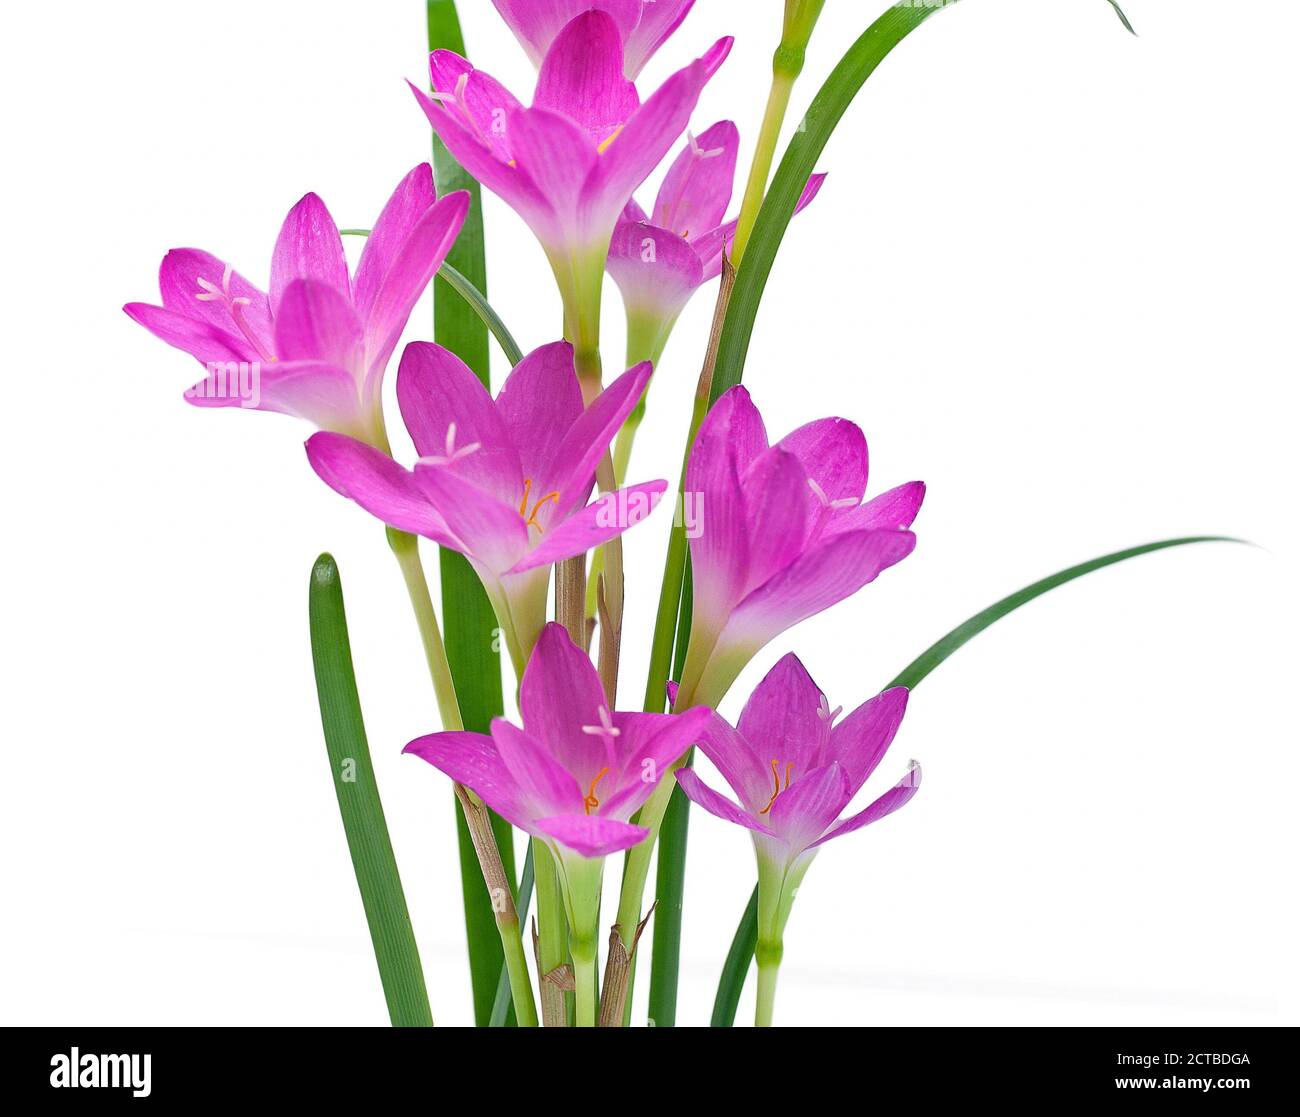 Rain Lilies flower isolated on white background Stock Photo